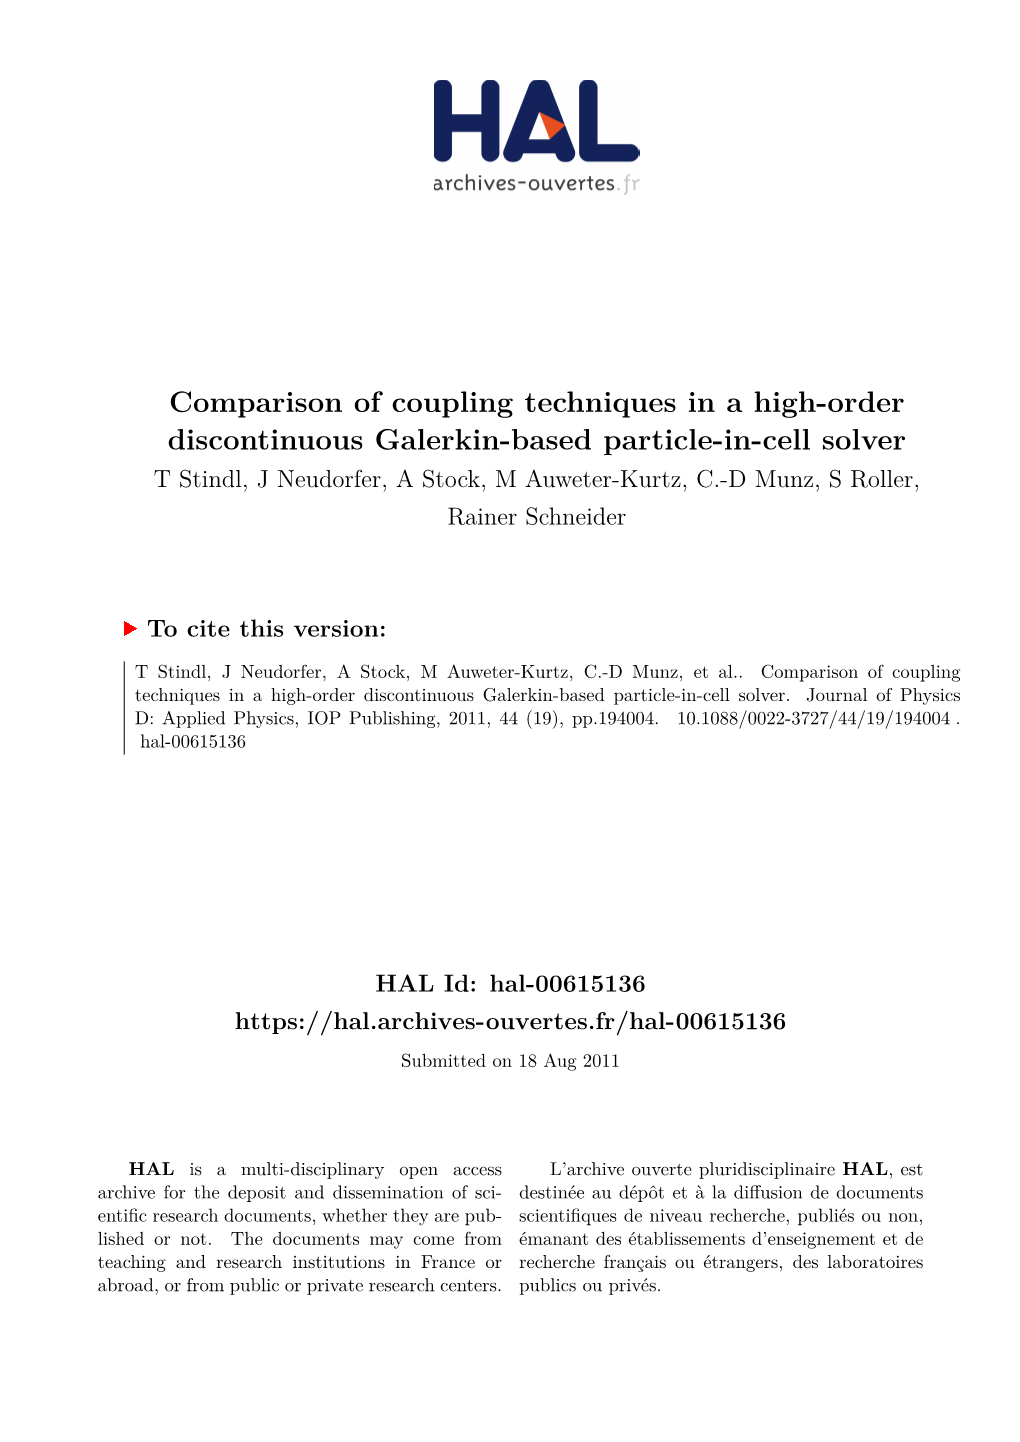 Comparison of Coupling Techniques in a High-Order Discontinuous Galerkin